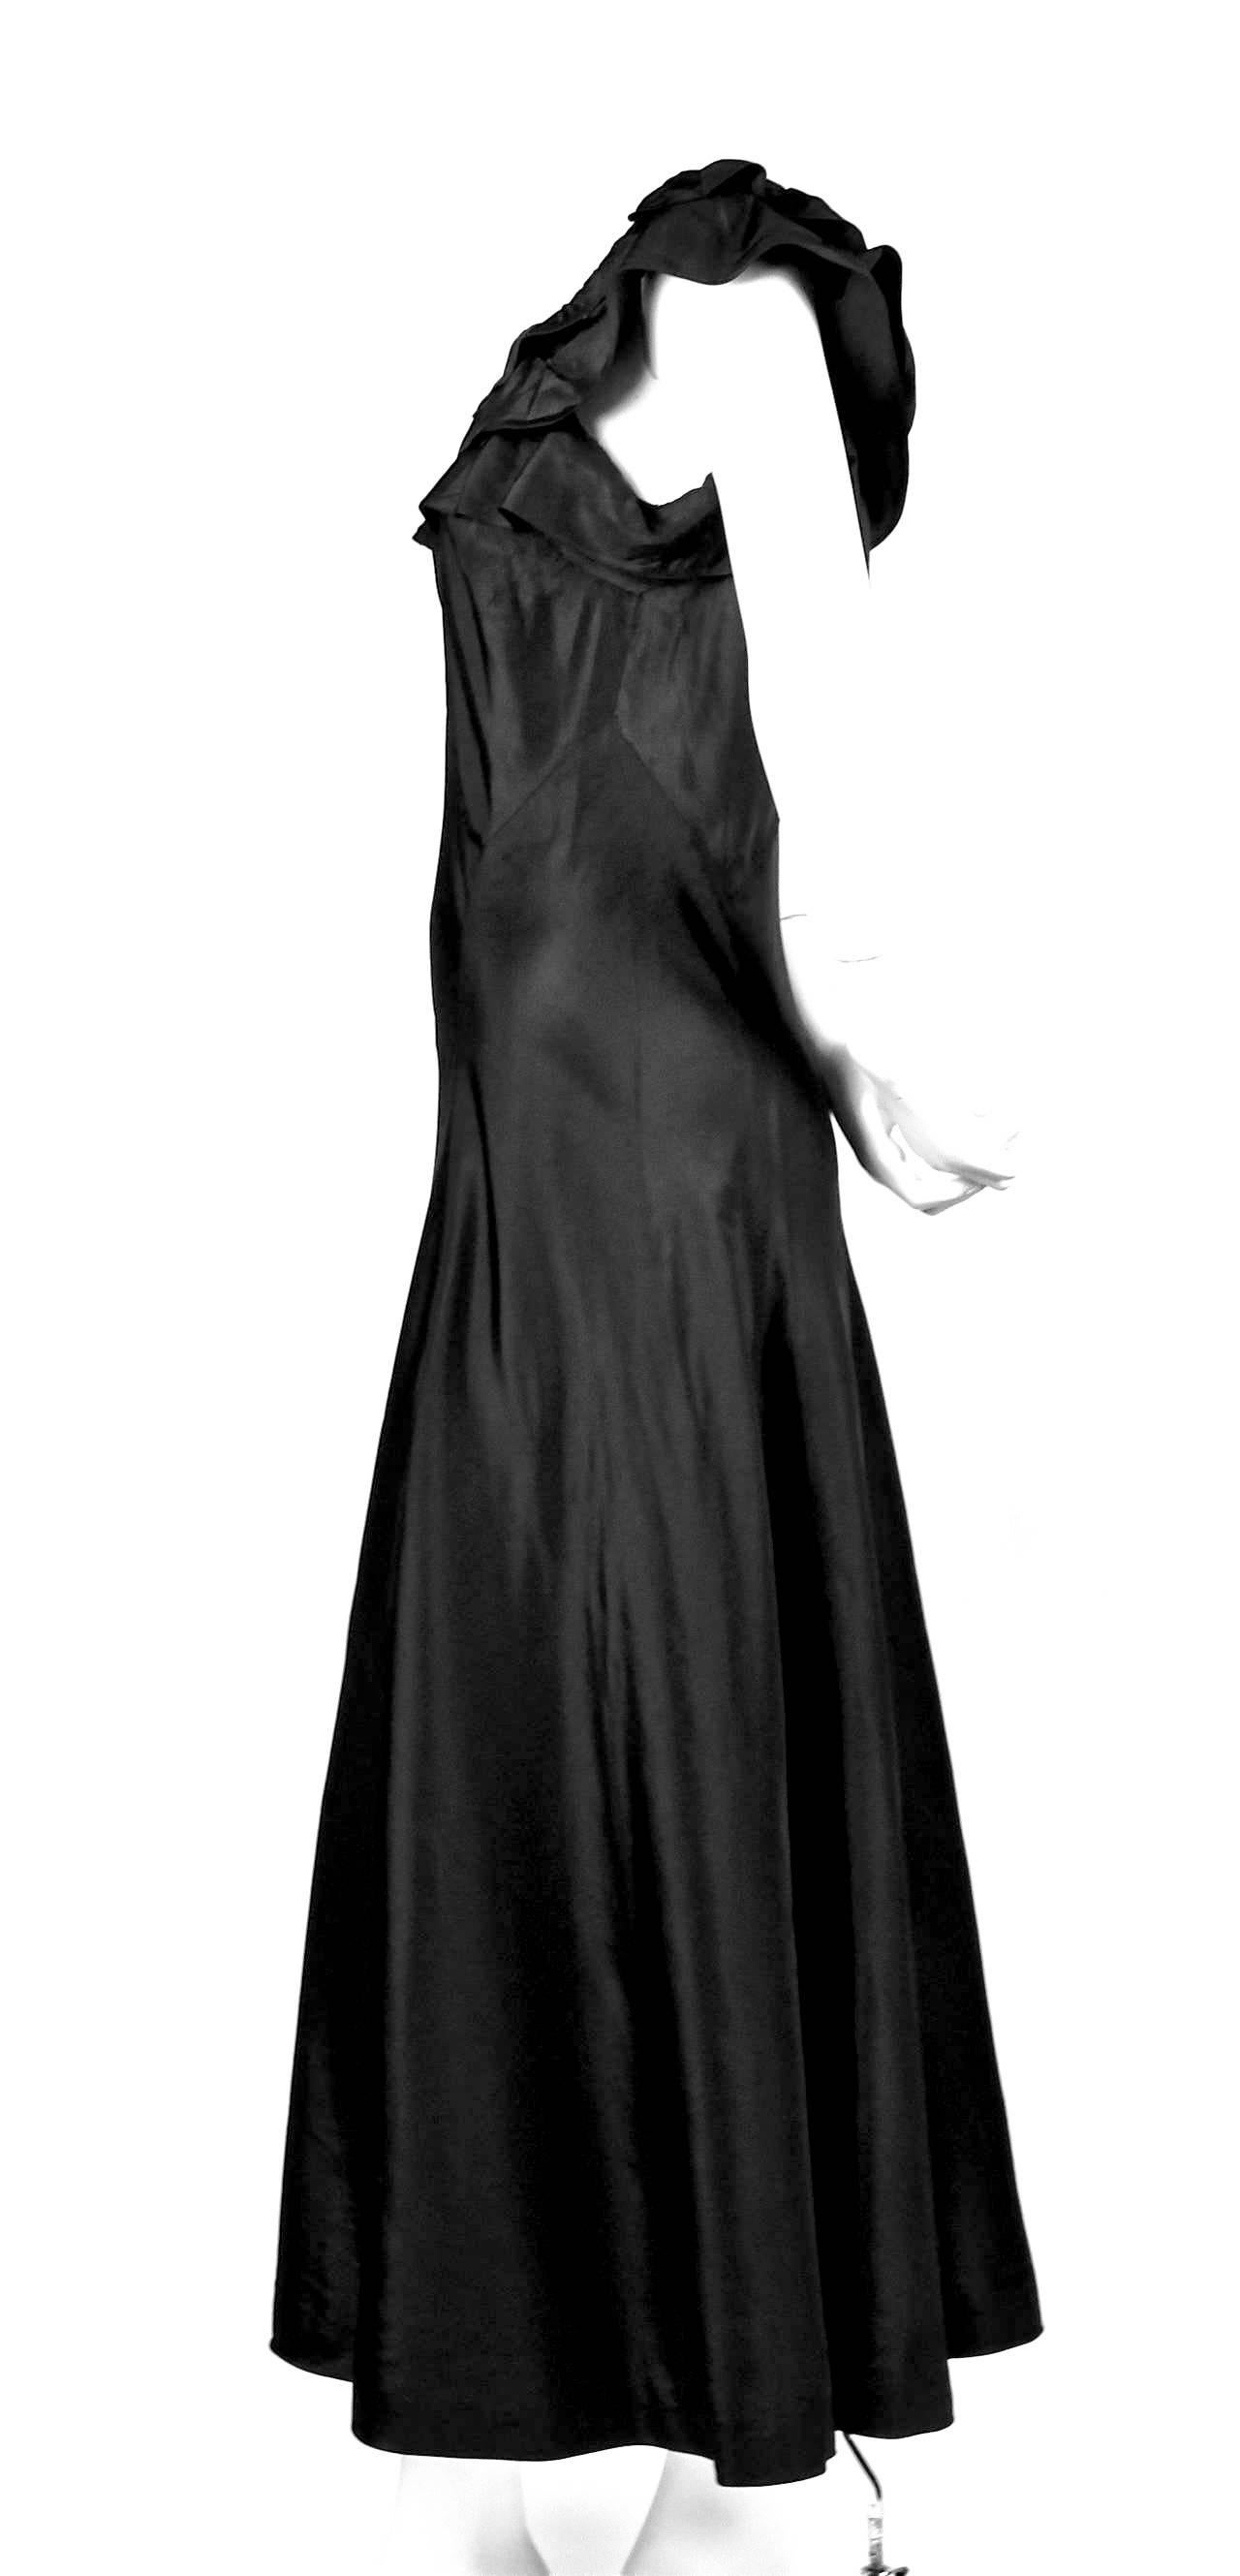 Extremely rare haute couture dress made of black taffeta with a bias cut designed by Jeanne Lanvin dating to 1933. Unique ruffled neckline and empire waistline. Dress slips on over the head with no zippers or closures. Hand finished seamed